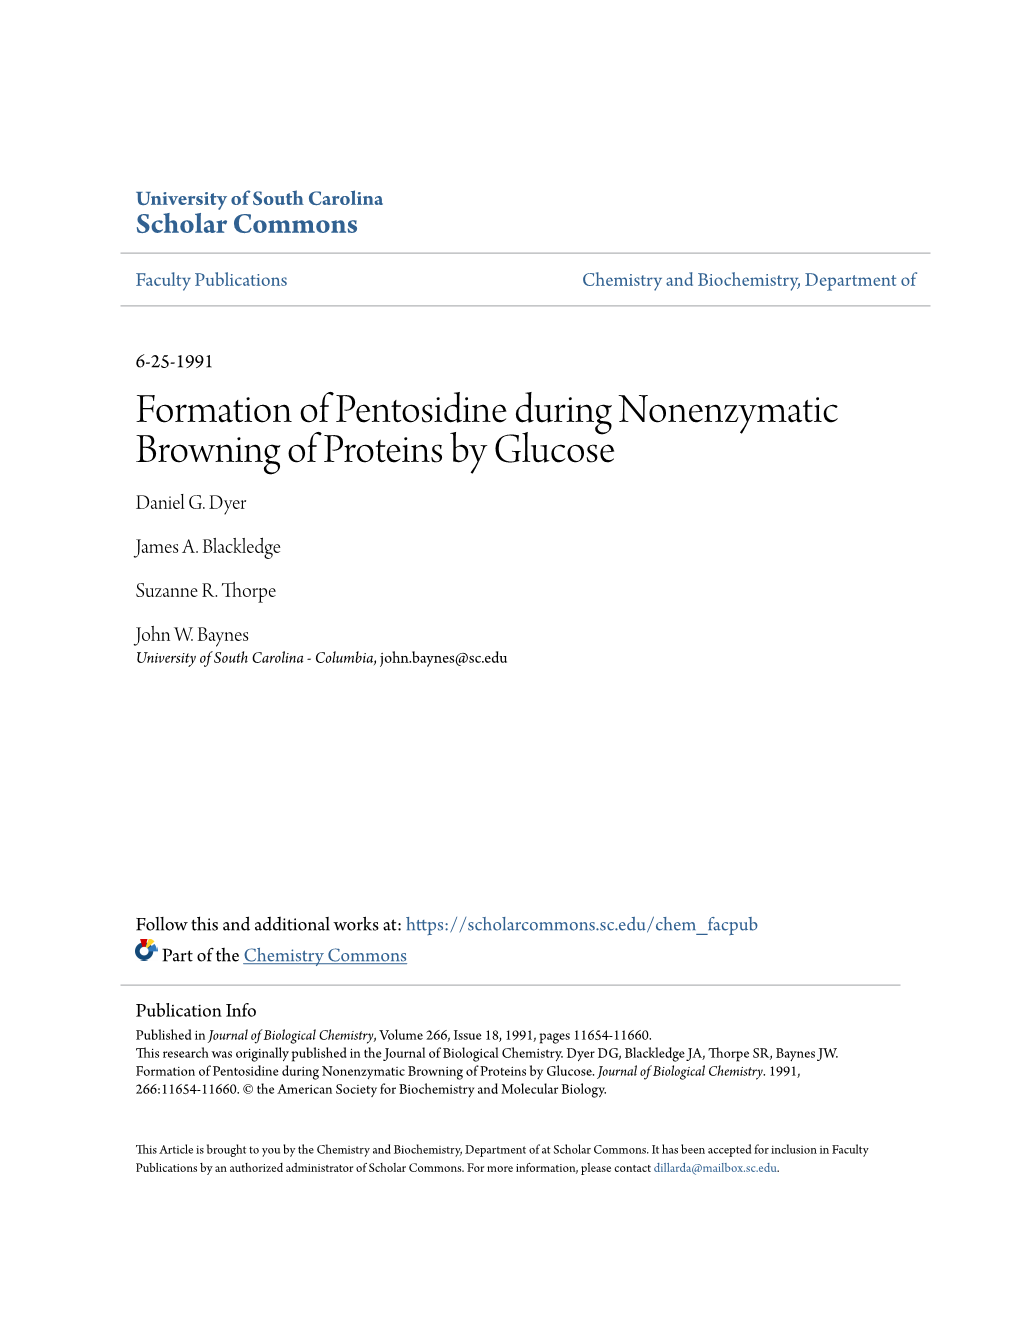 Formation of Pentosidine During Nonenzymatic Browning of Proteins by Glucose Daniel G